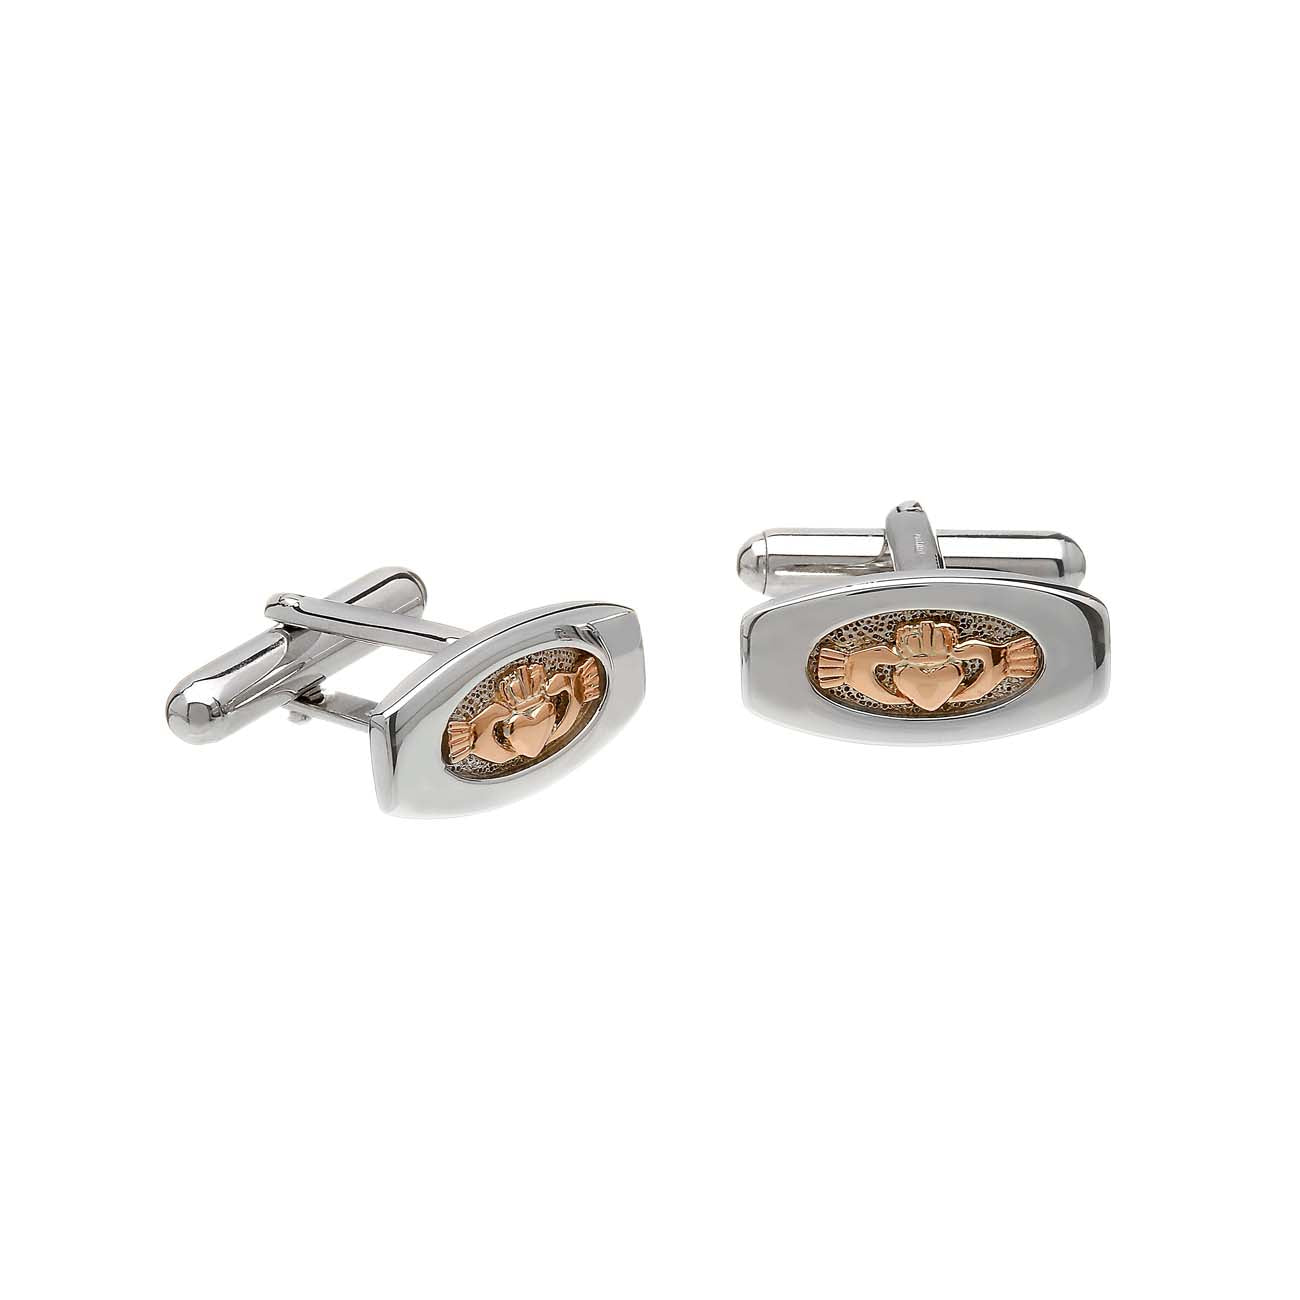 Sterling Silver and Rose Gold Claddagh Cufflinks